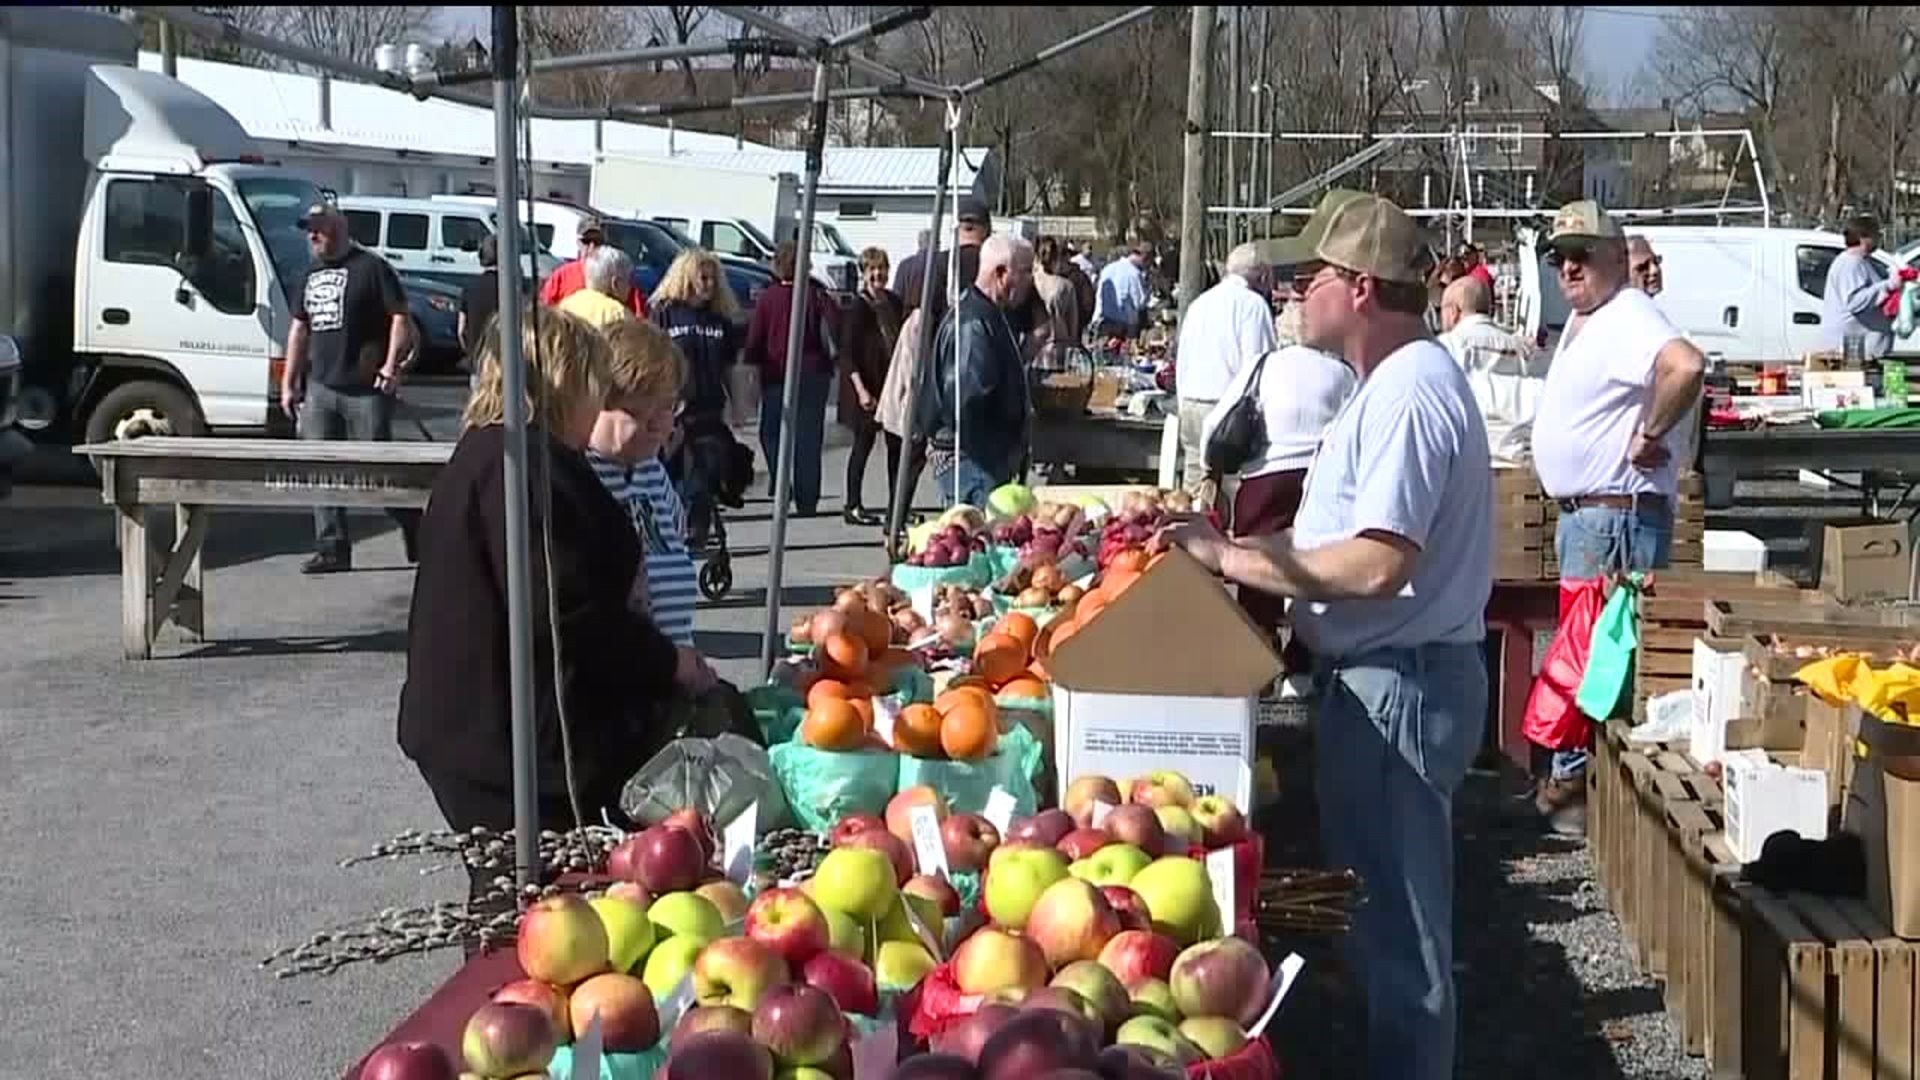 Weather Brings Crowd to Market